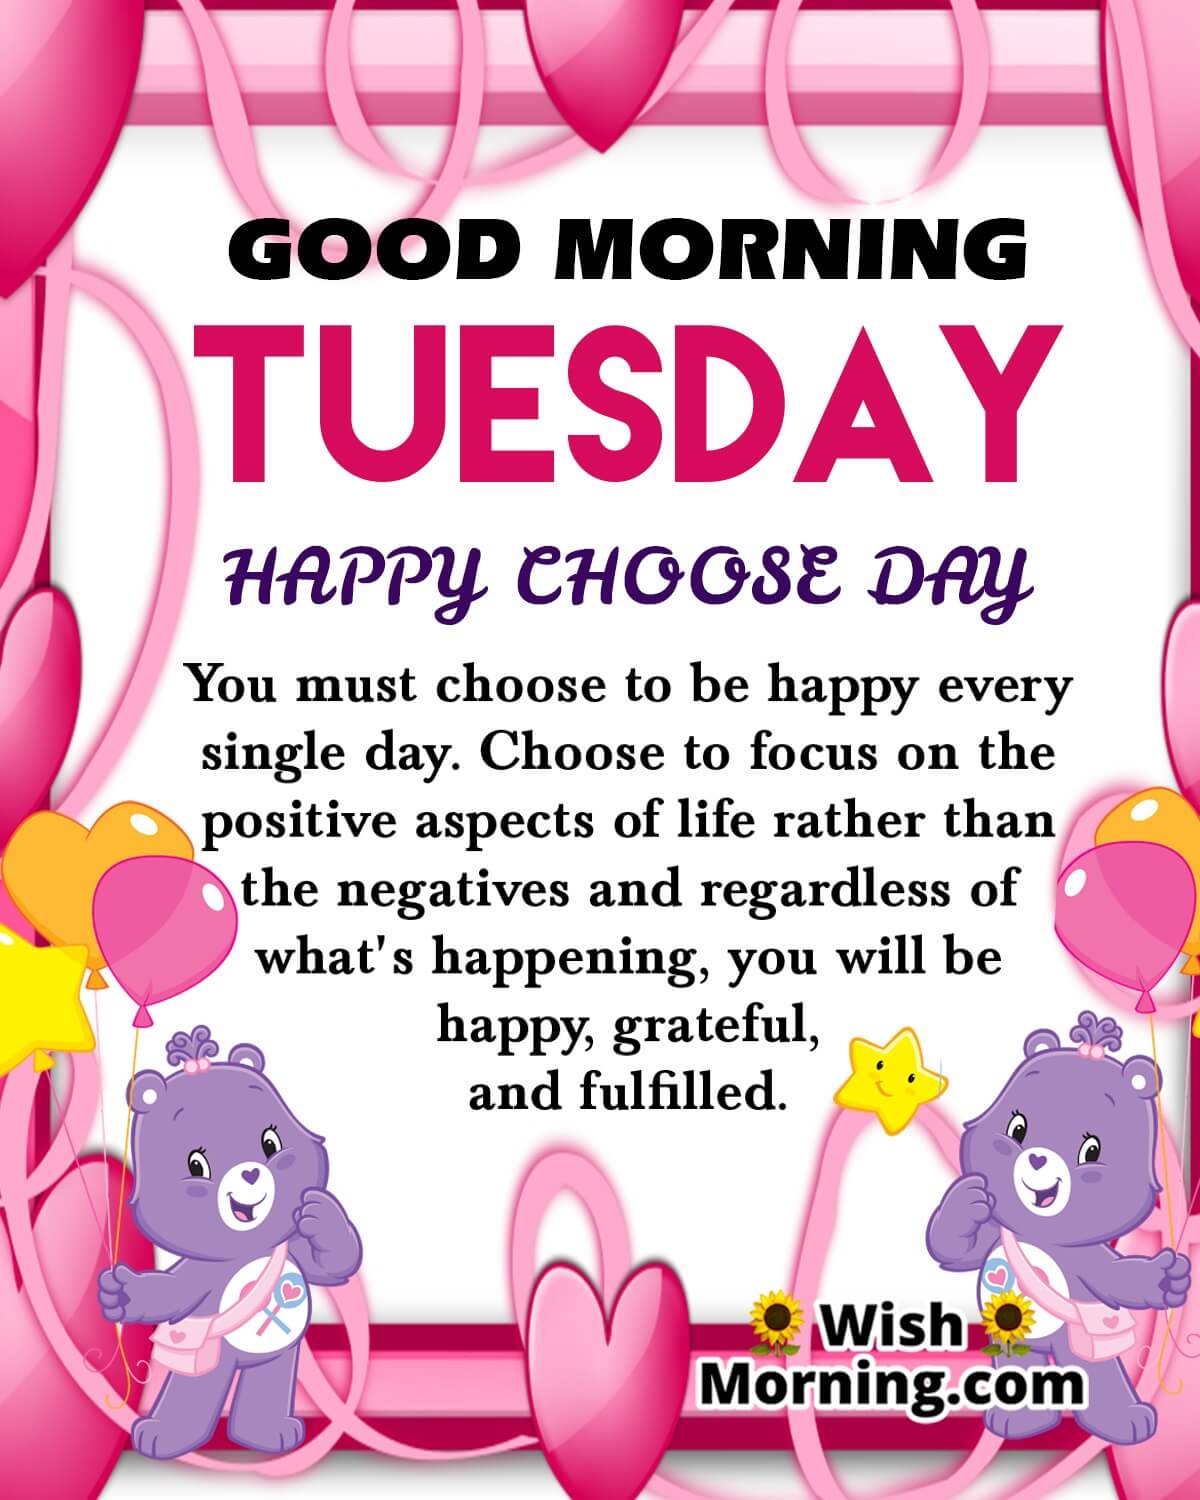 Good Morning Tuesday Happy Choose Day